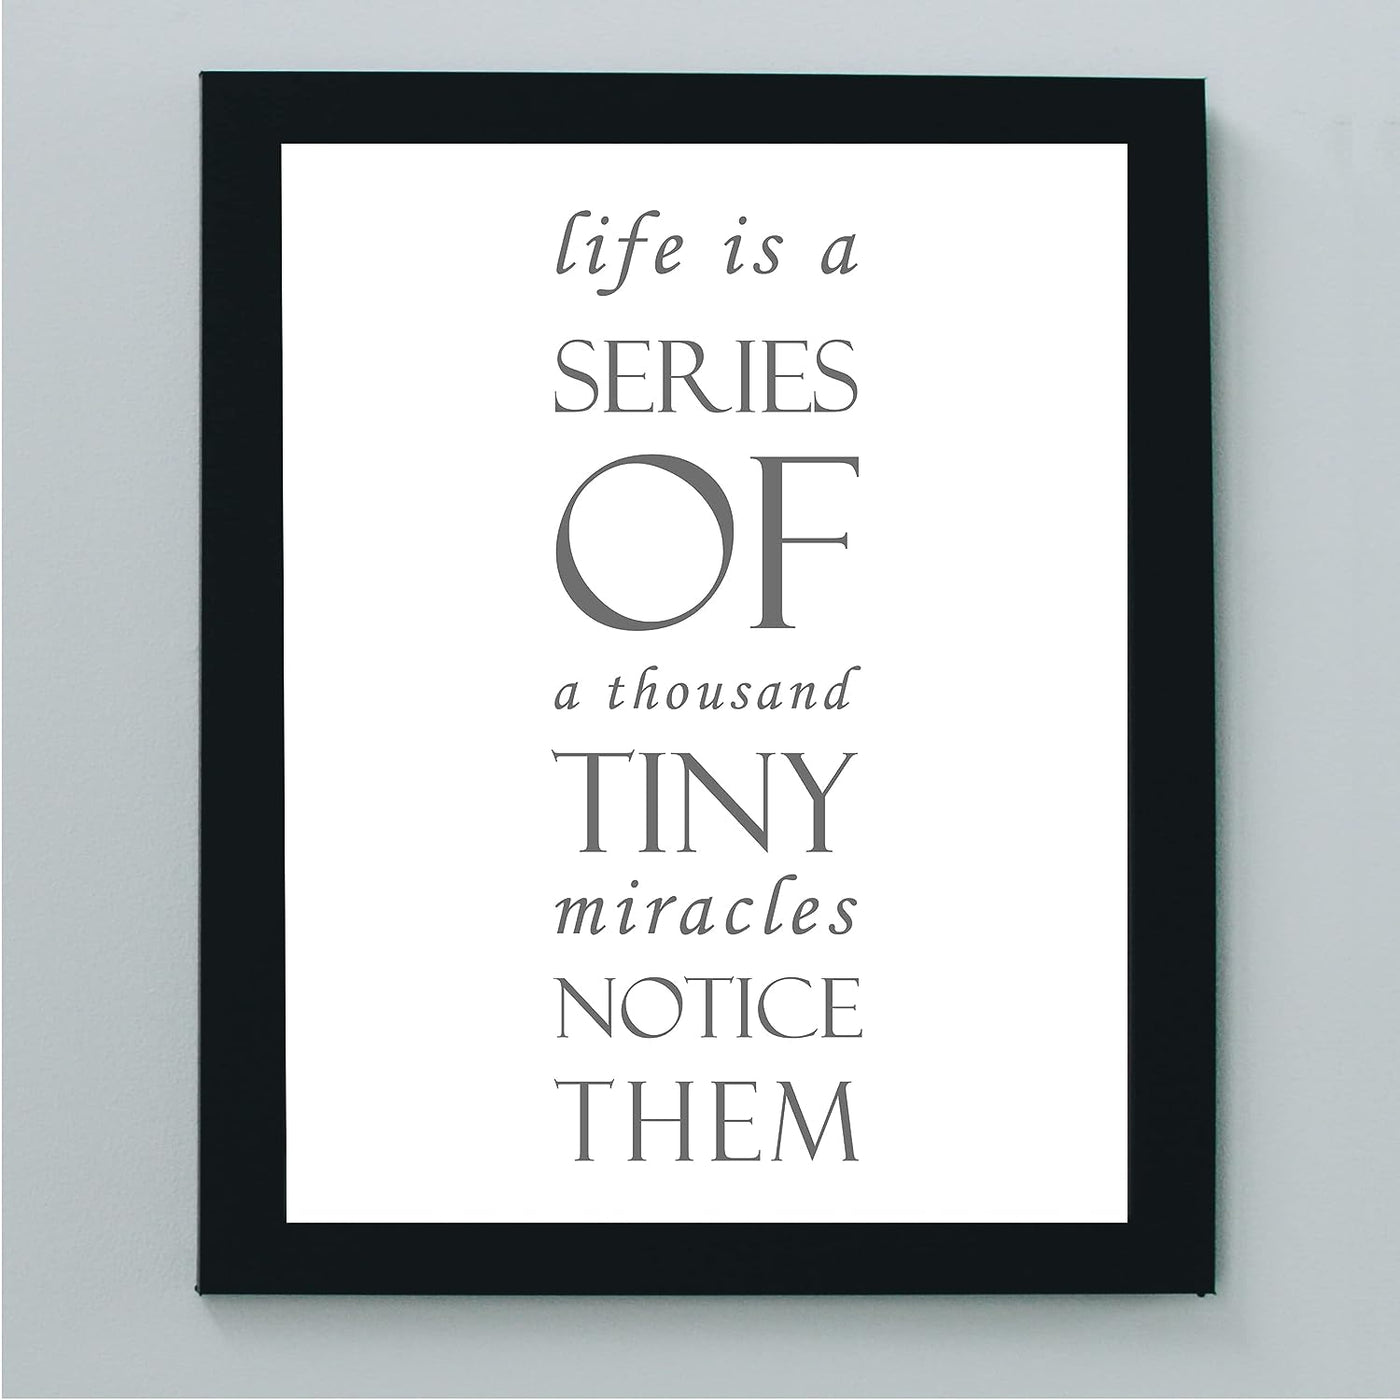 Life Is Series of Tiny Miracles-Notice Them Inspirational Wall Art Quote-8x10" Modern Farmhouse Decor Print-Ready to Frame. Motivational Home-Office-Desk-School Decor. Great Gift for Inspiration!